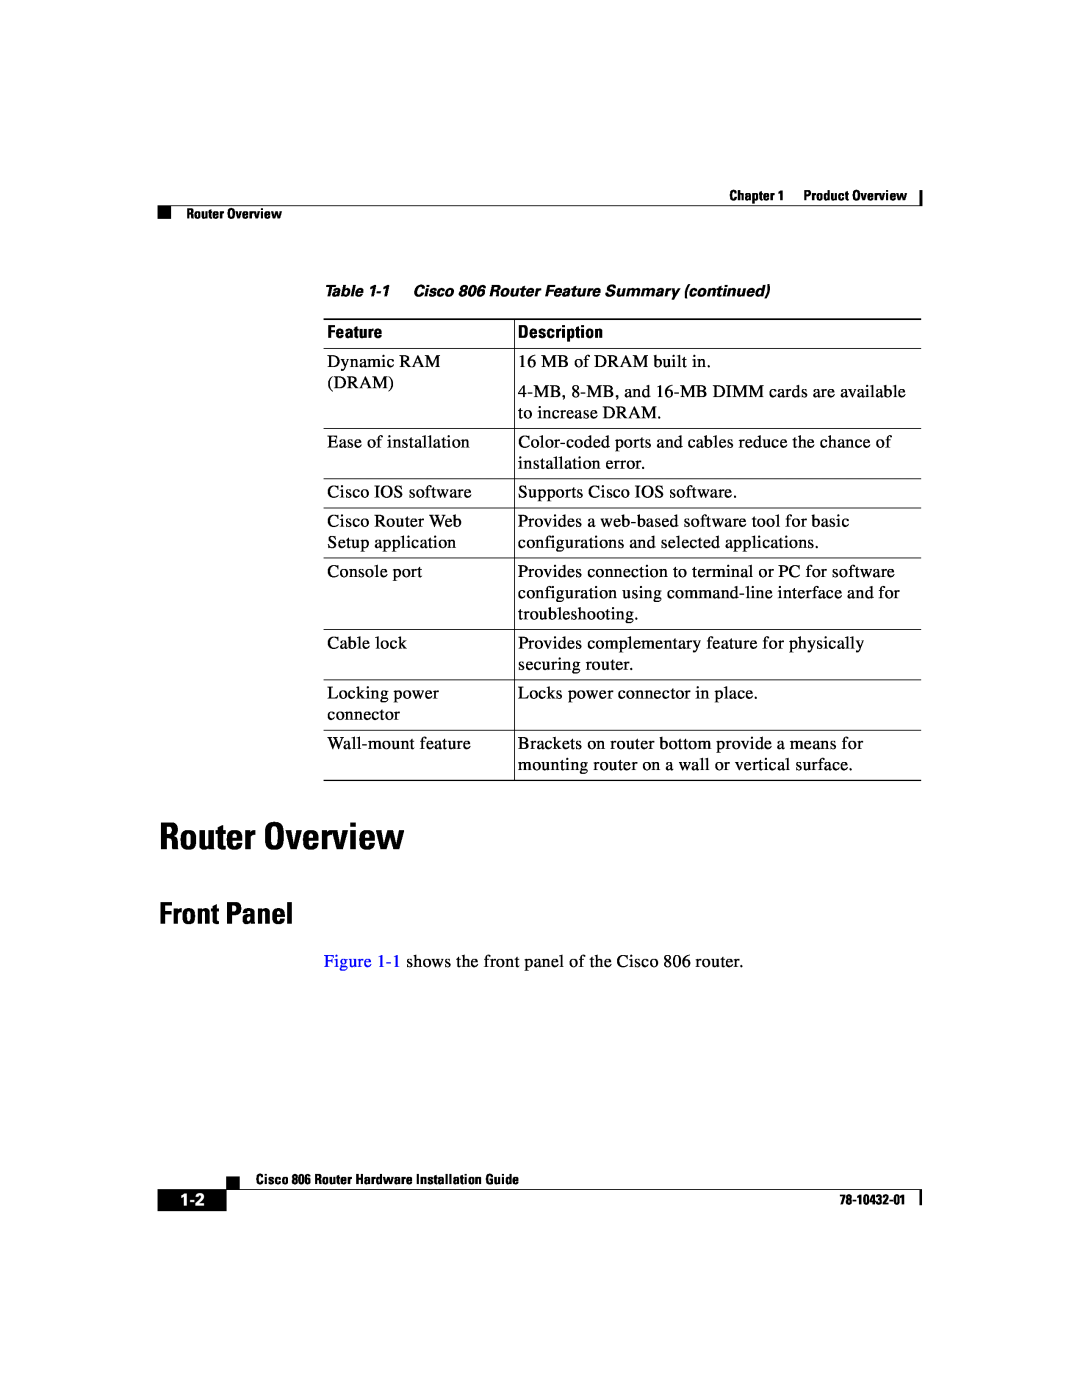 Cisco Systems 806 manual Router Overview, Front Panel 